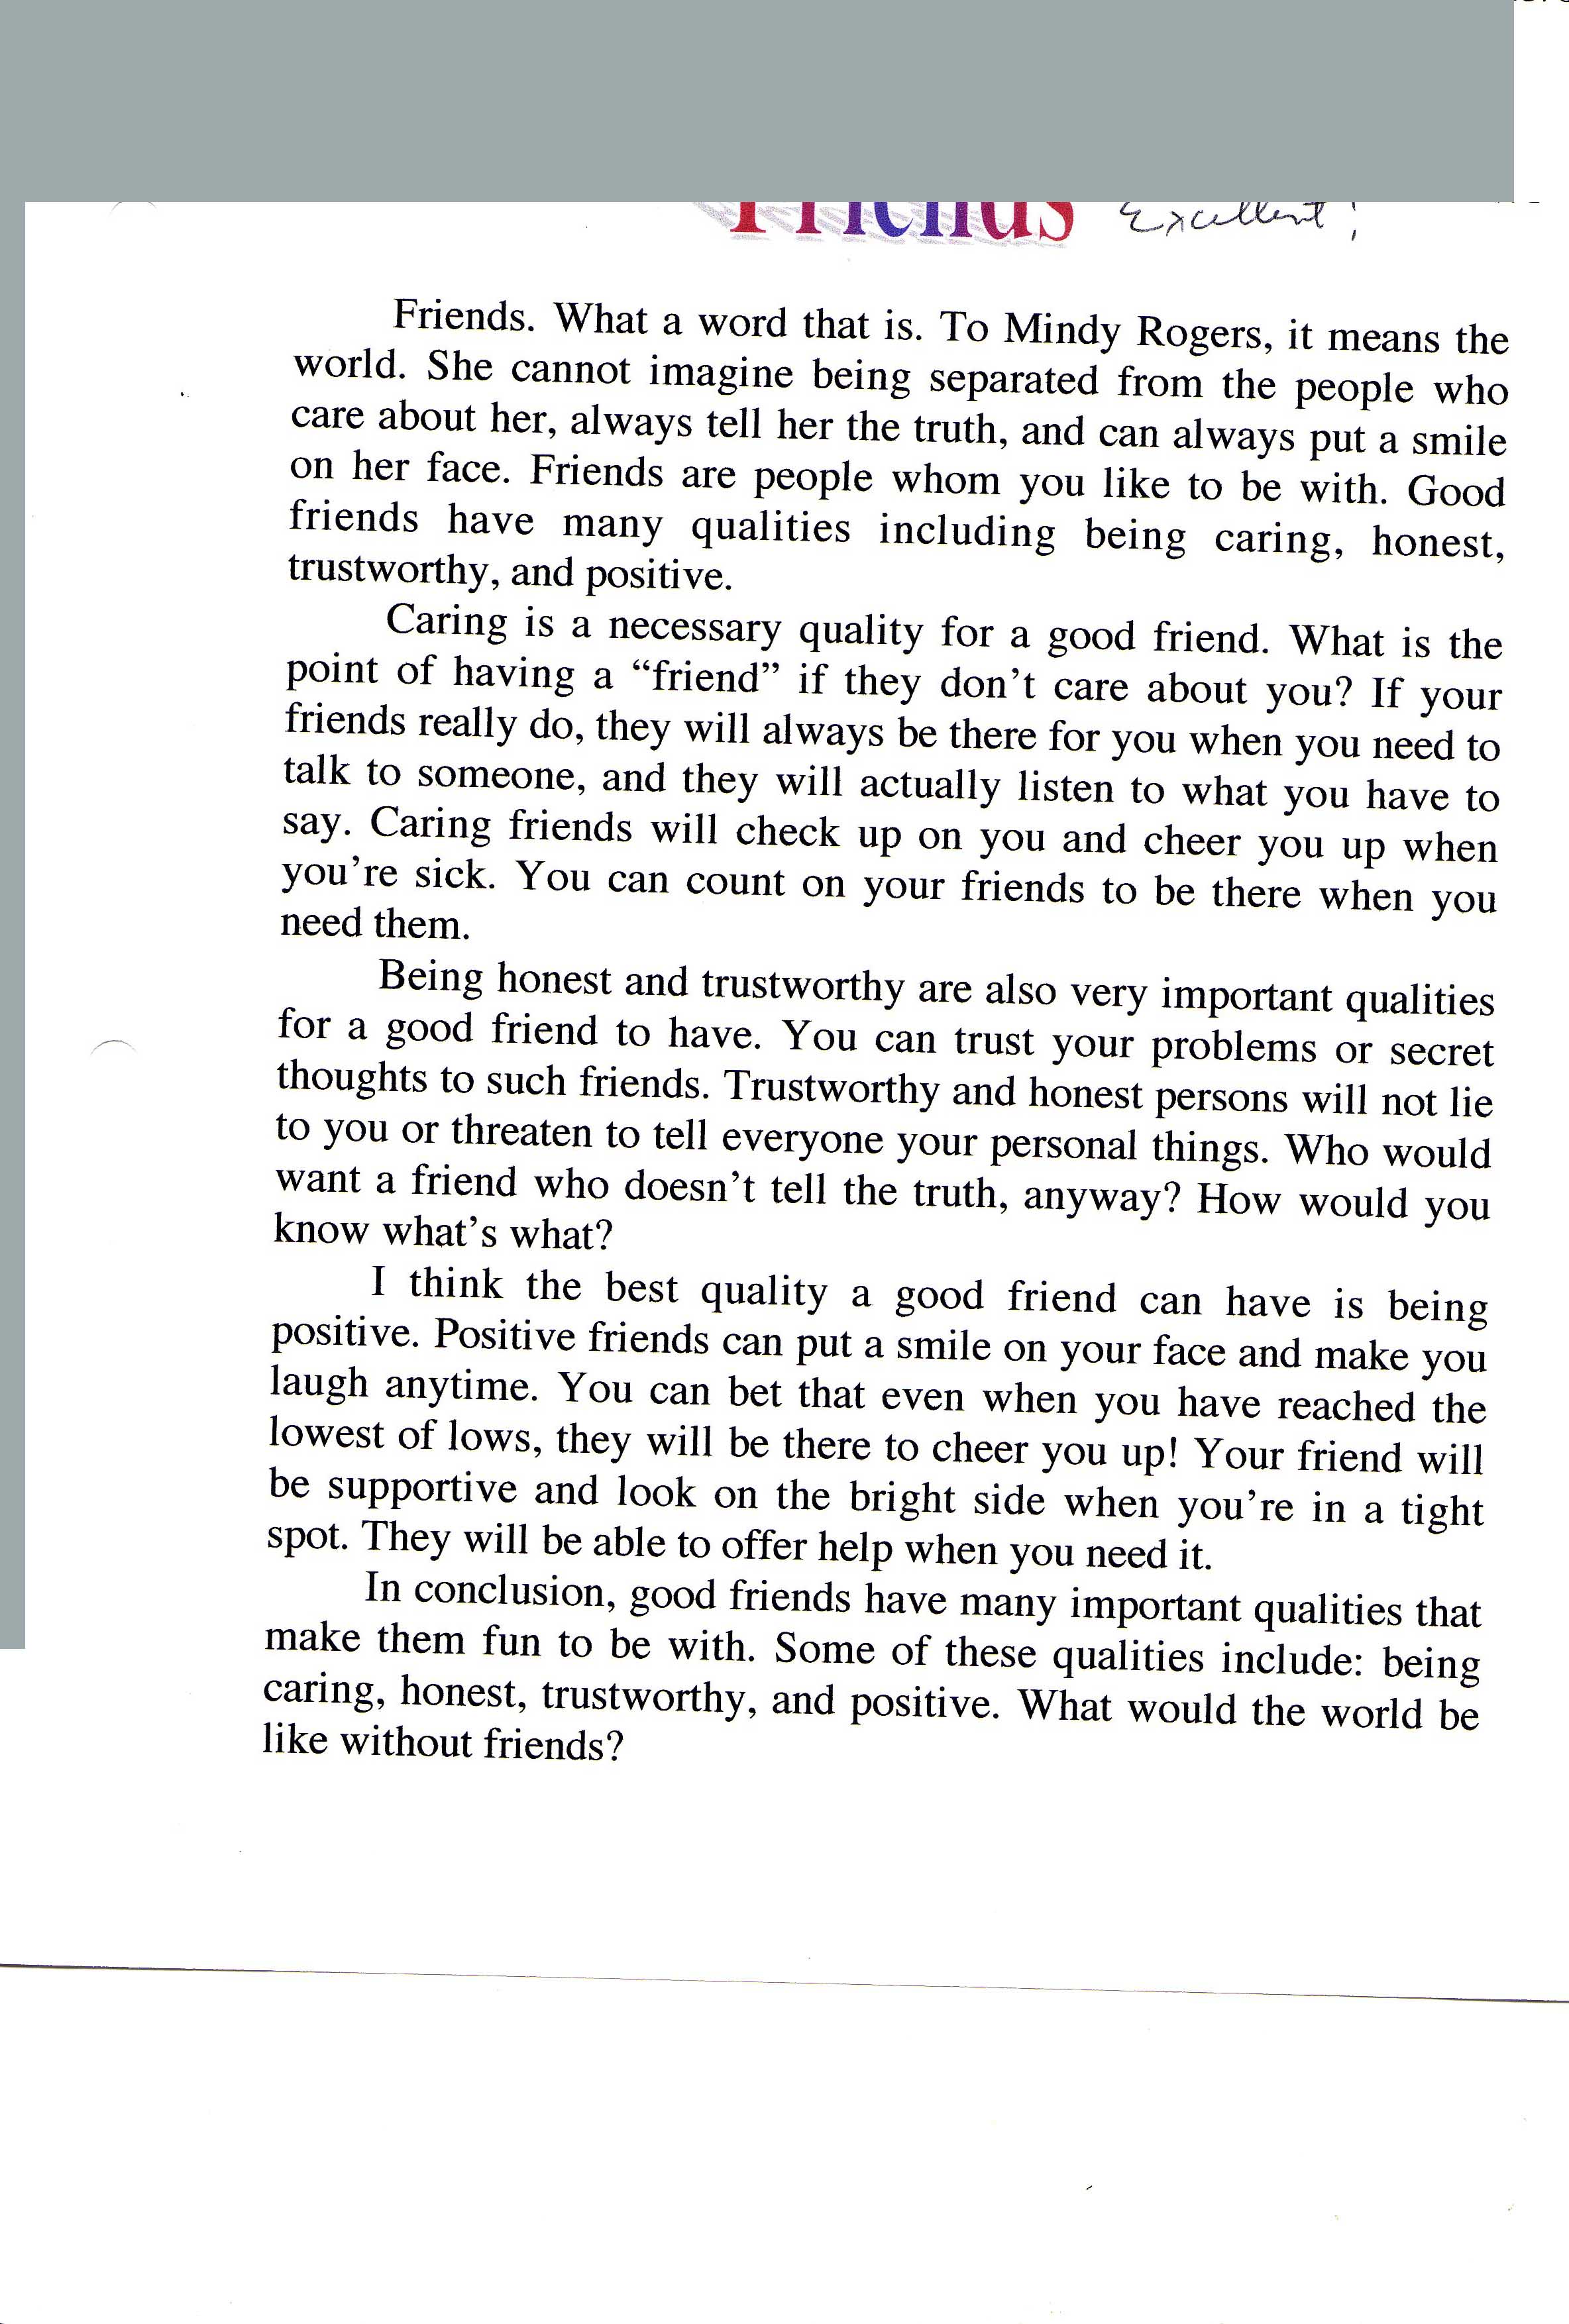 reflection essay about friendship